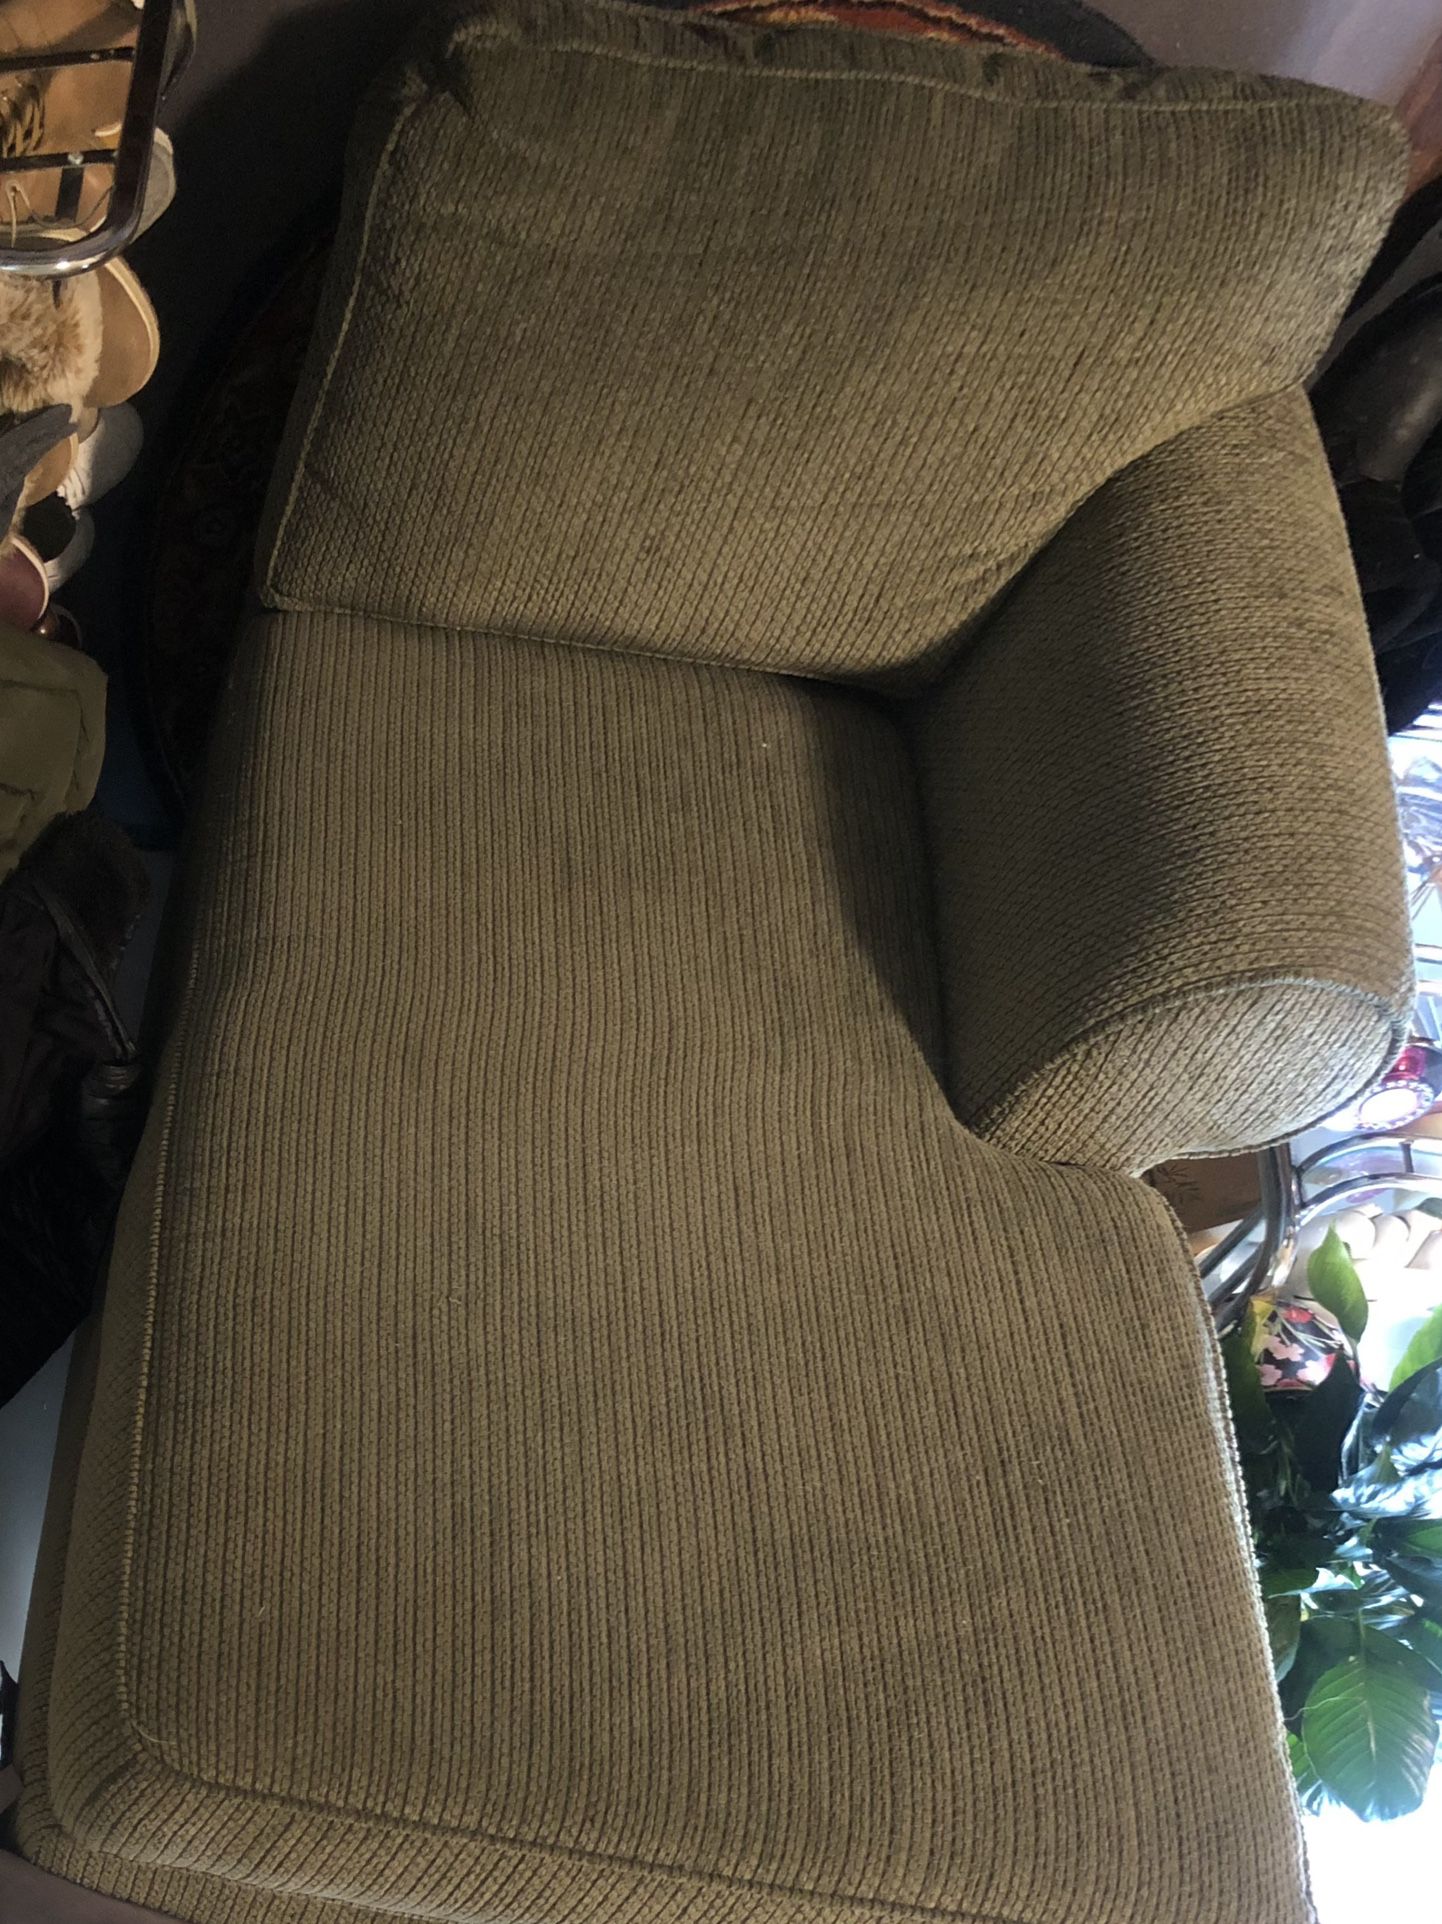 Chaise Sofa Chair - Gently used